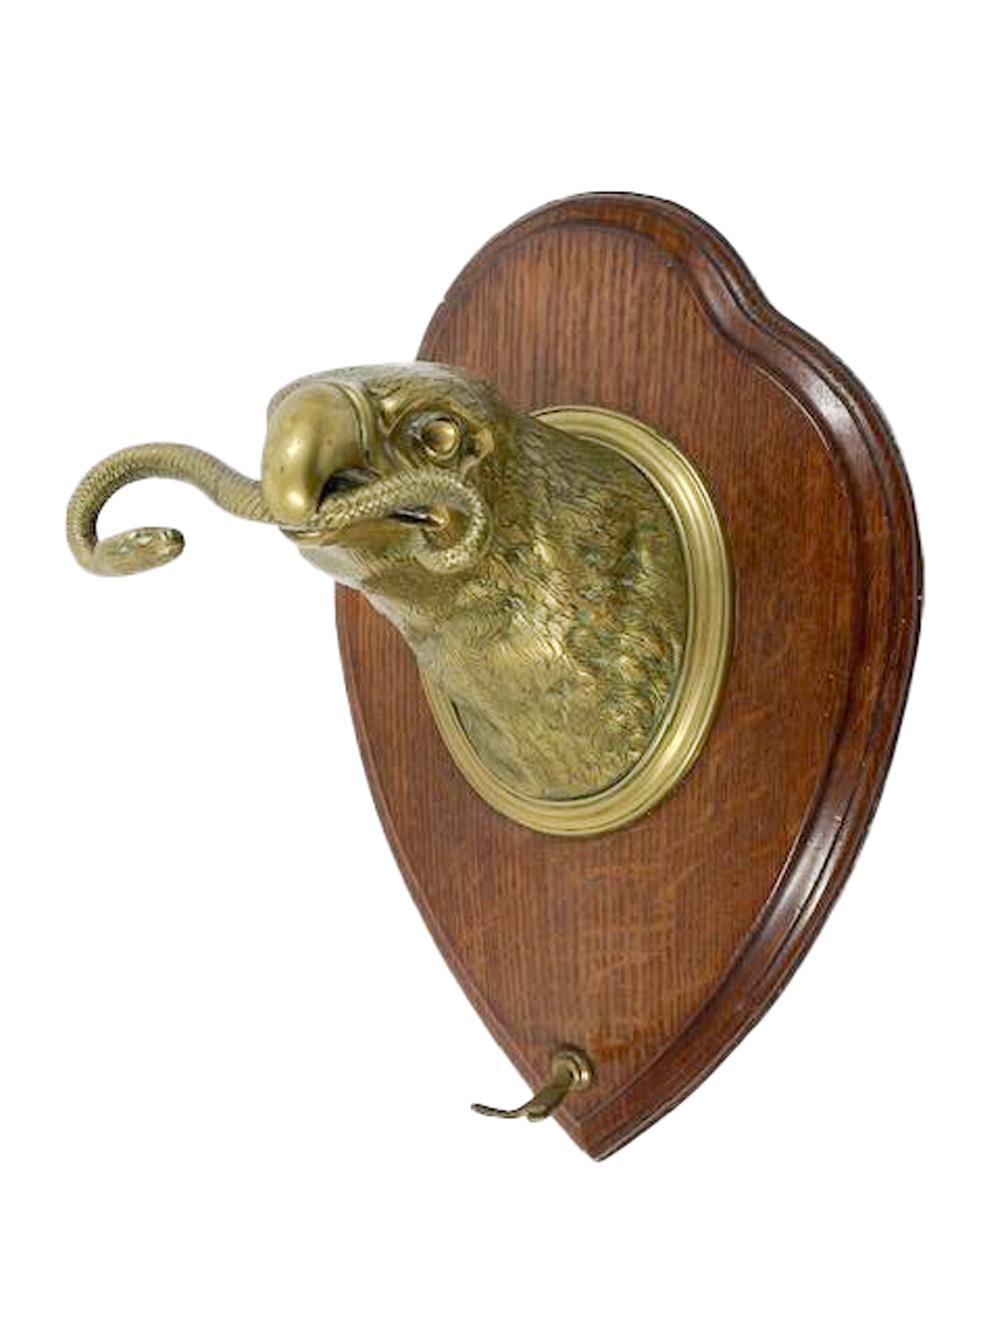 Wall Mounted Brass Eagle Head on Oak Plaque Holding a Dinner Gong by Wm. Tonks For Sale 6